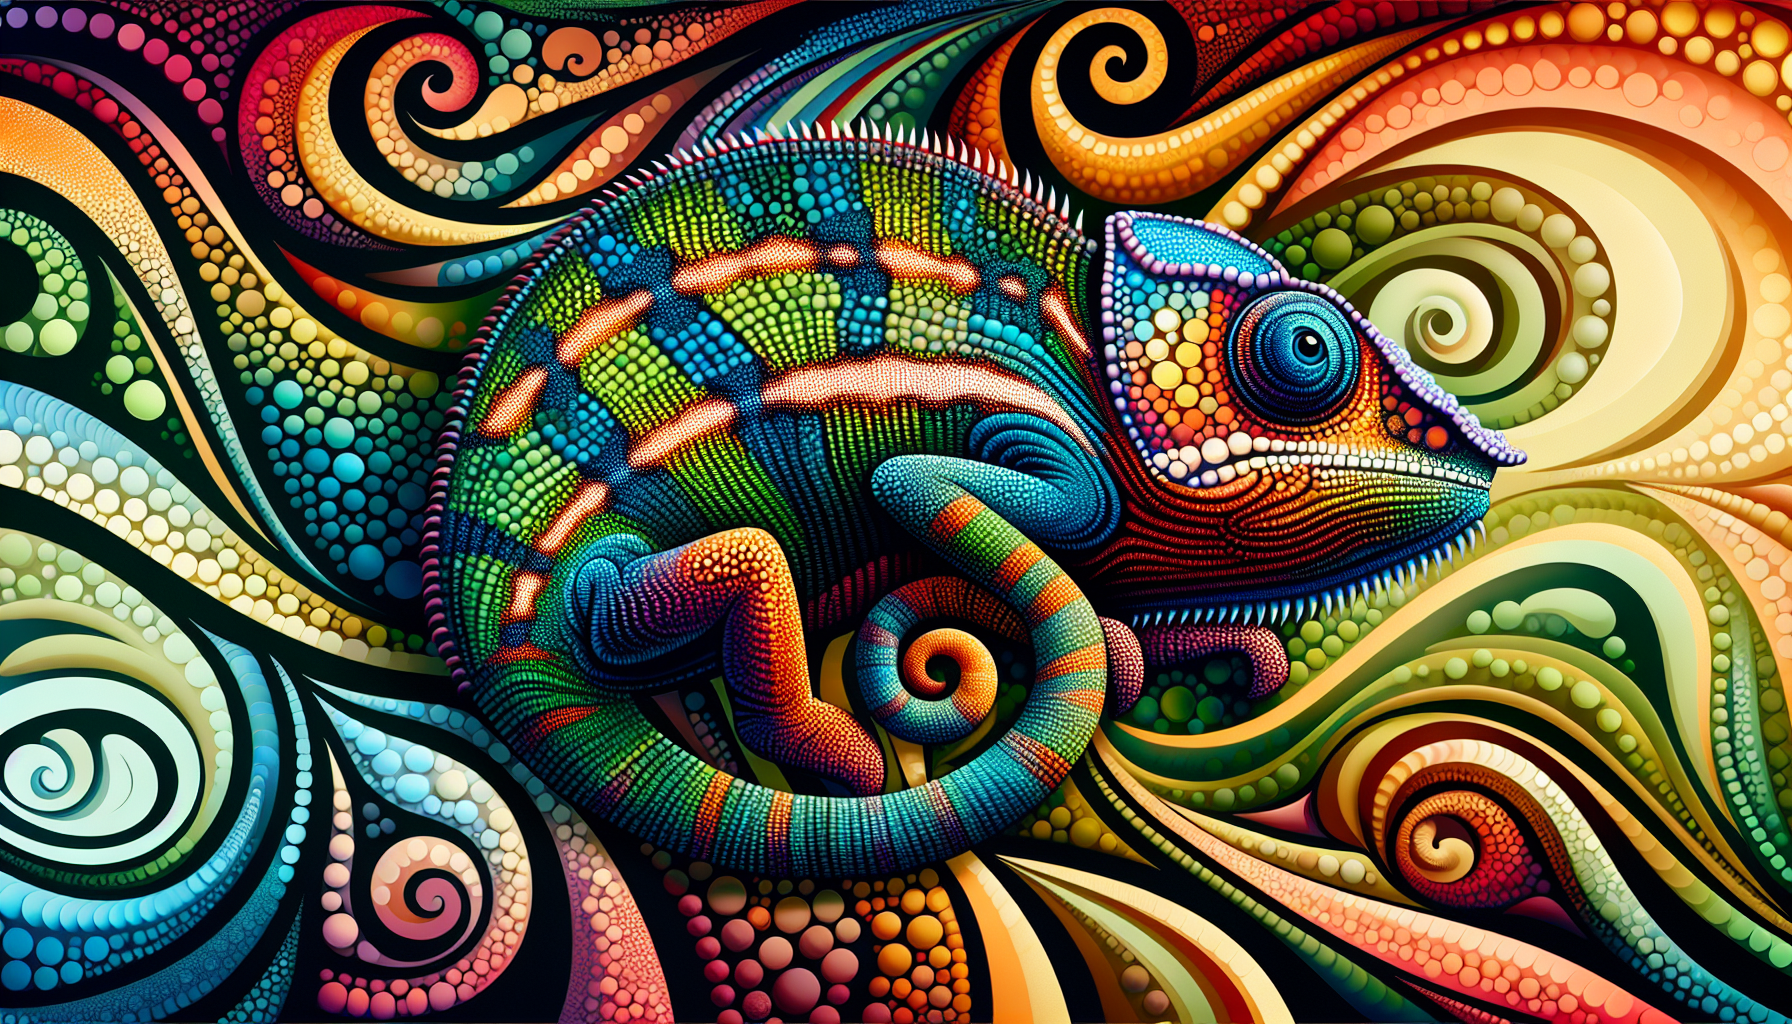 Illustration of a brand personality evolving like a chameleon